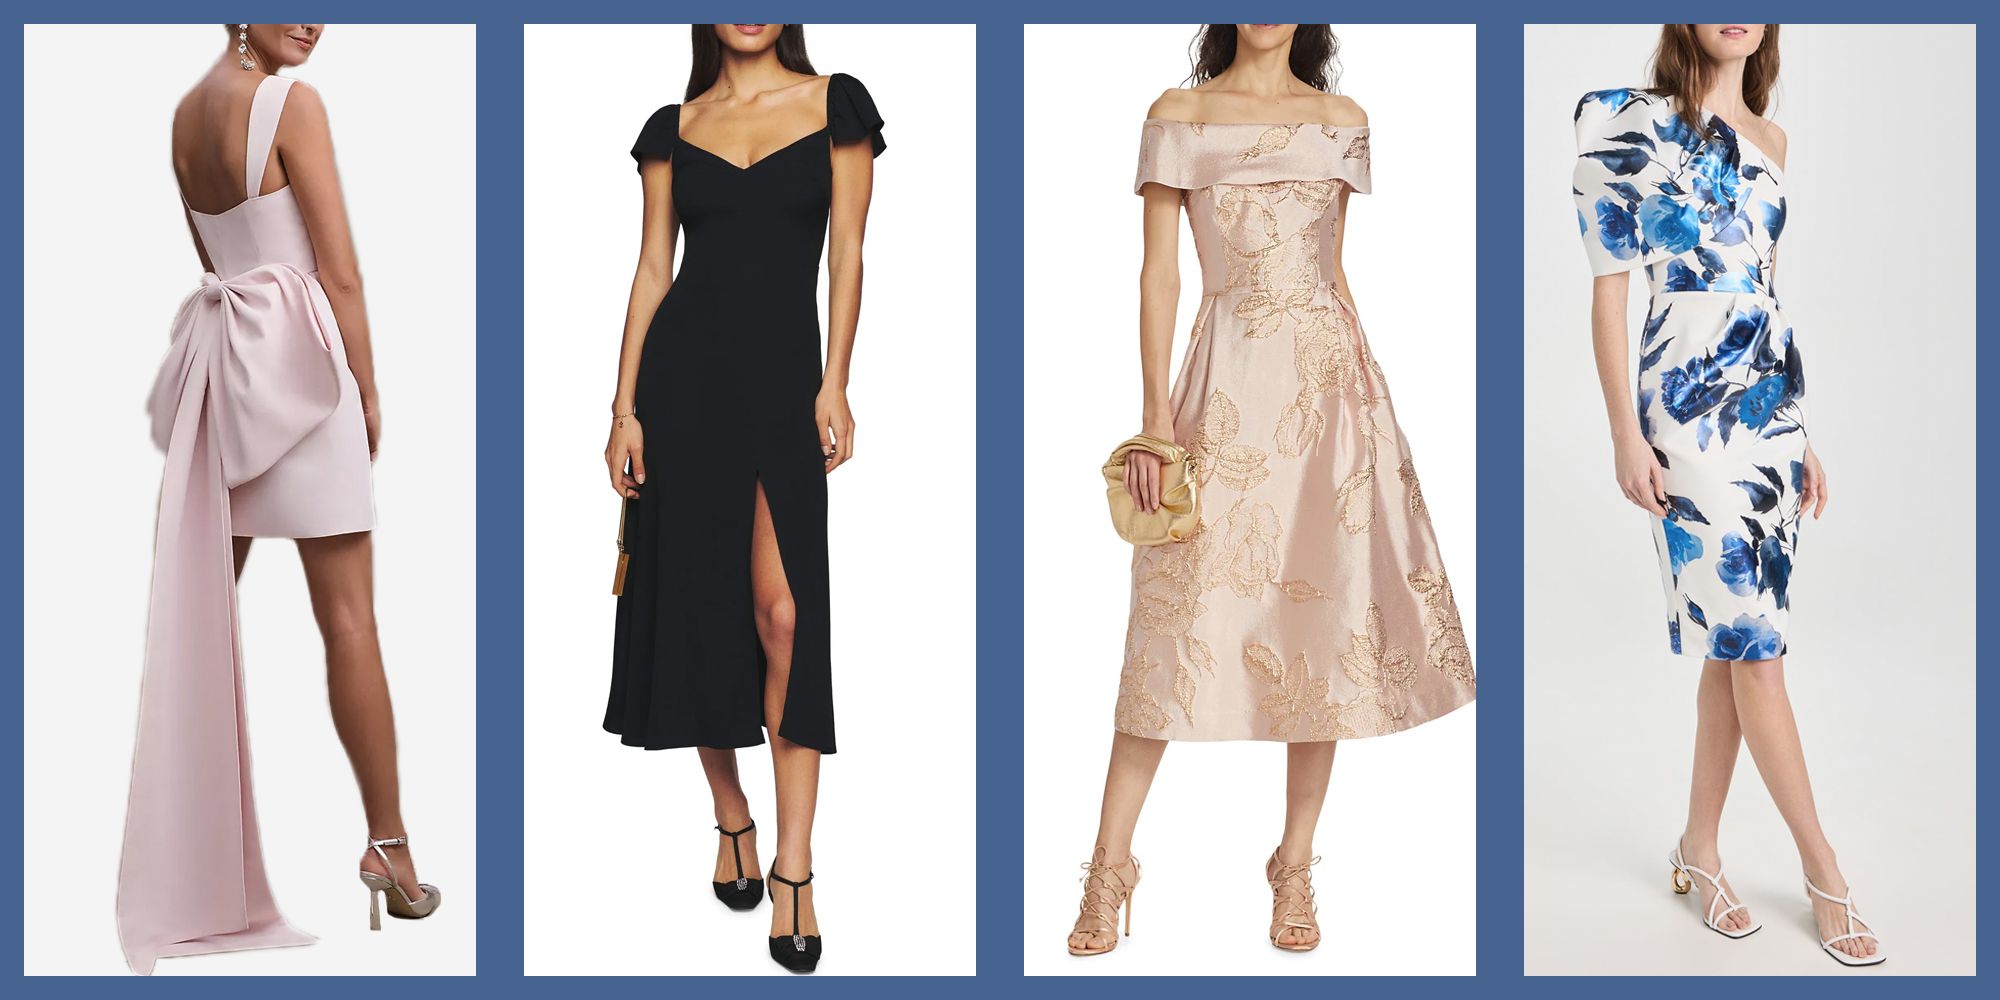 Chic and Elegant Cocktail Dresses for Weddings: Latest Styles